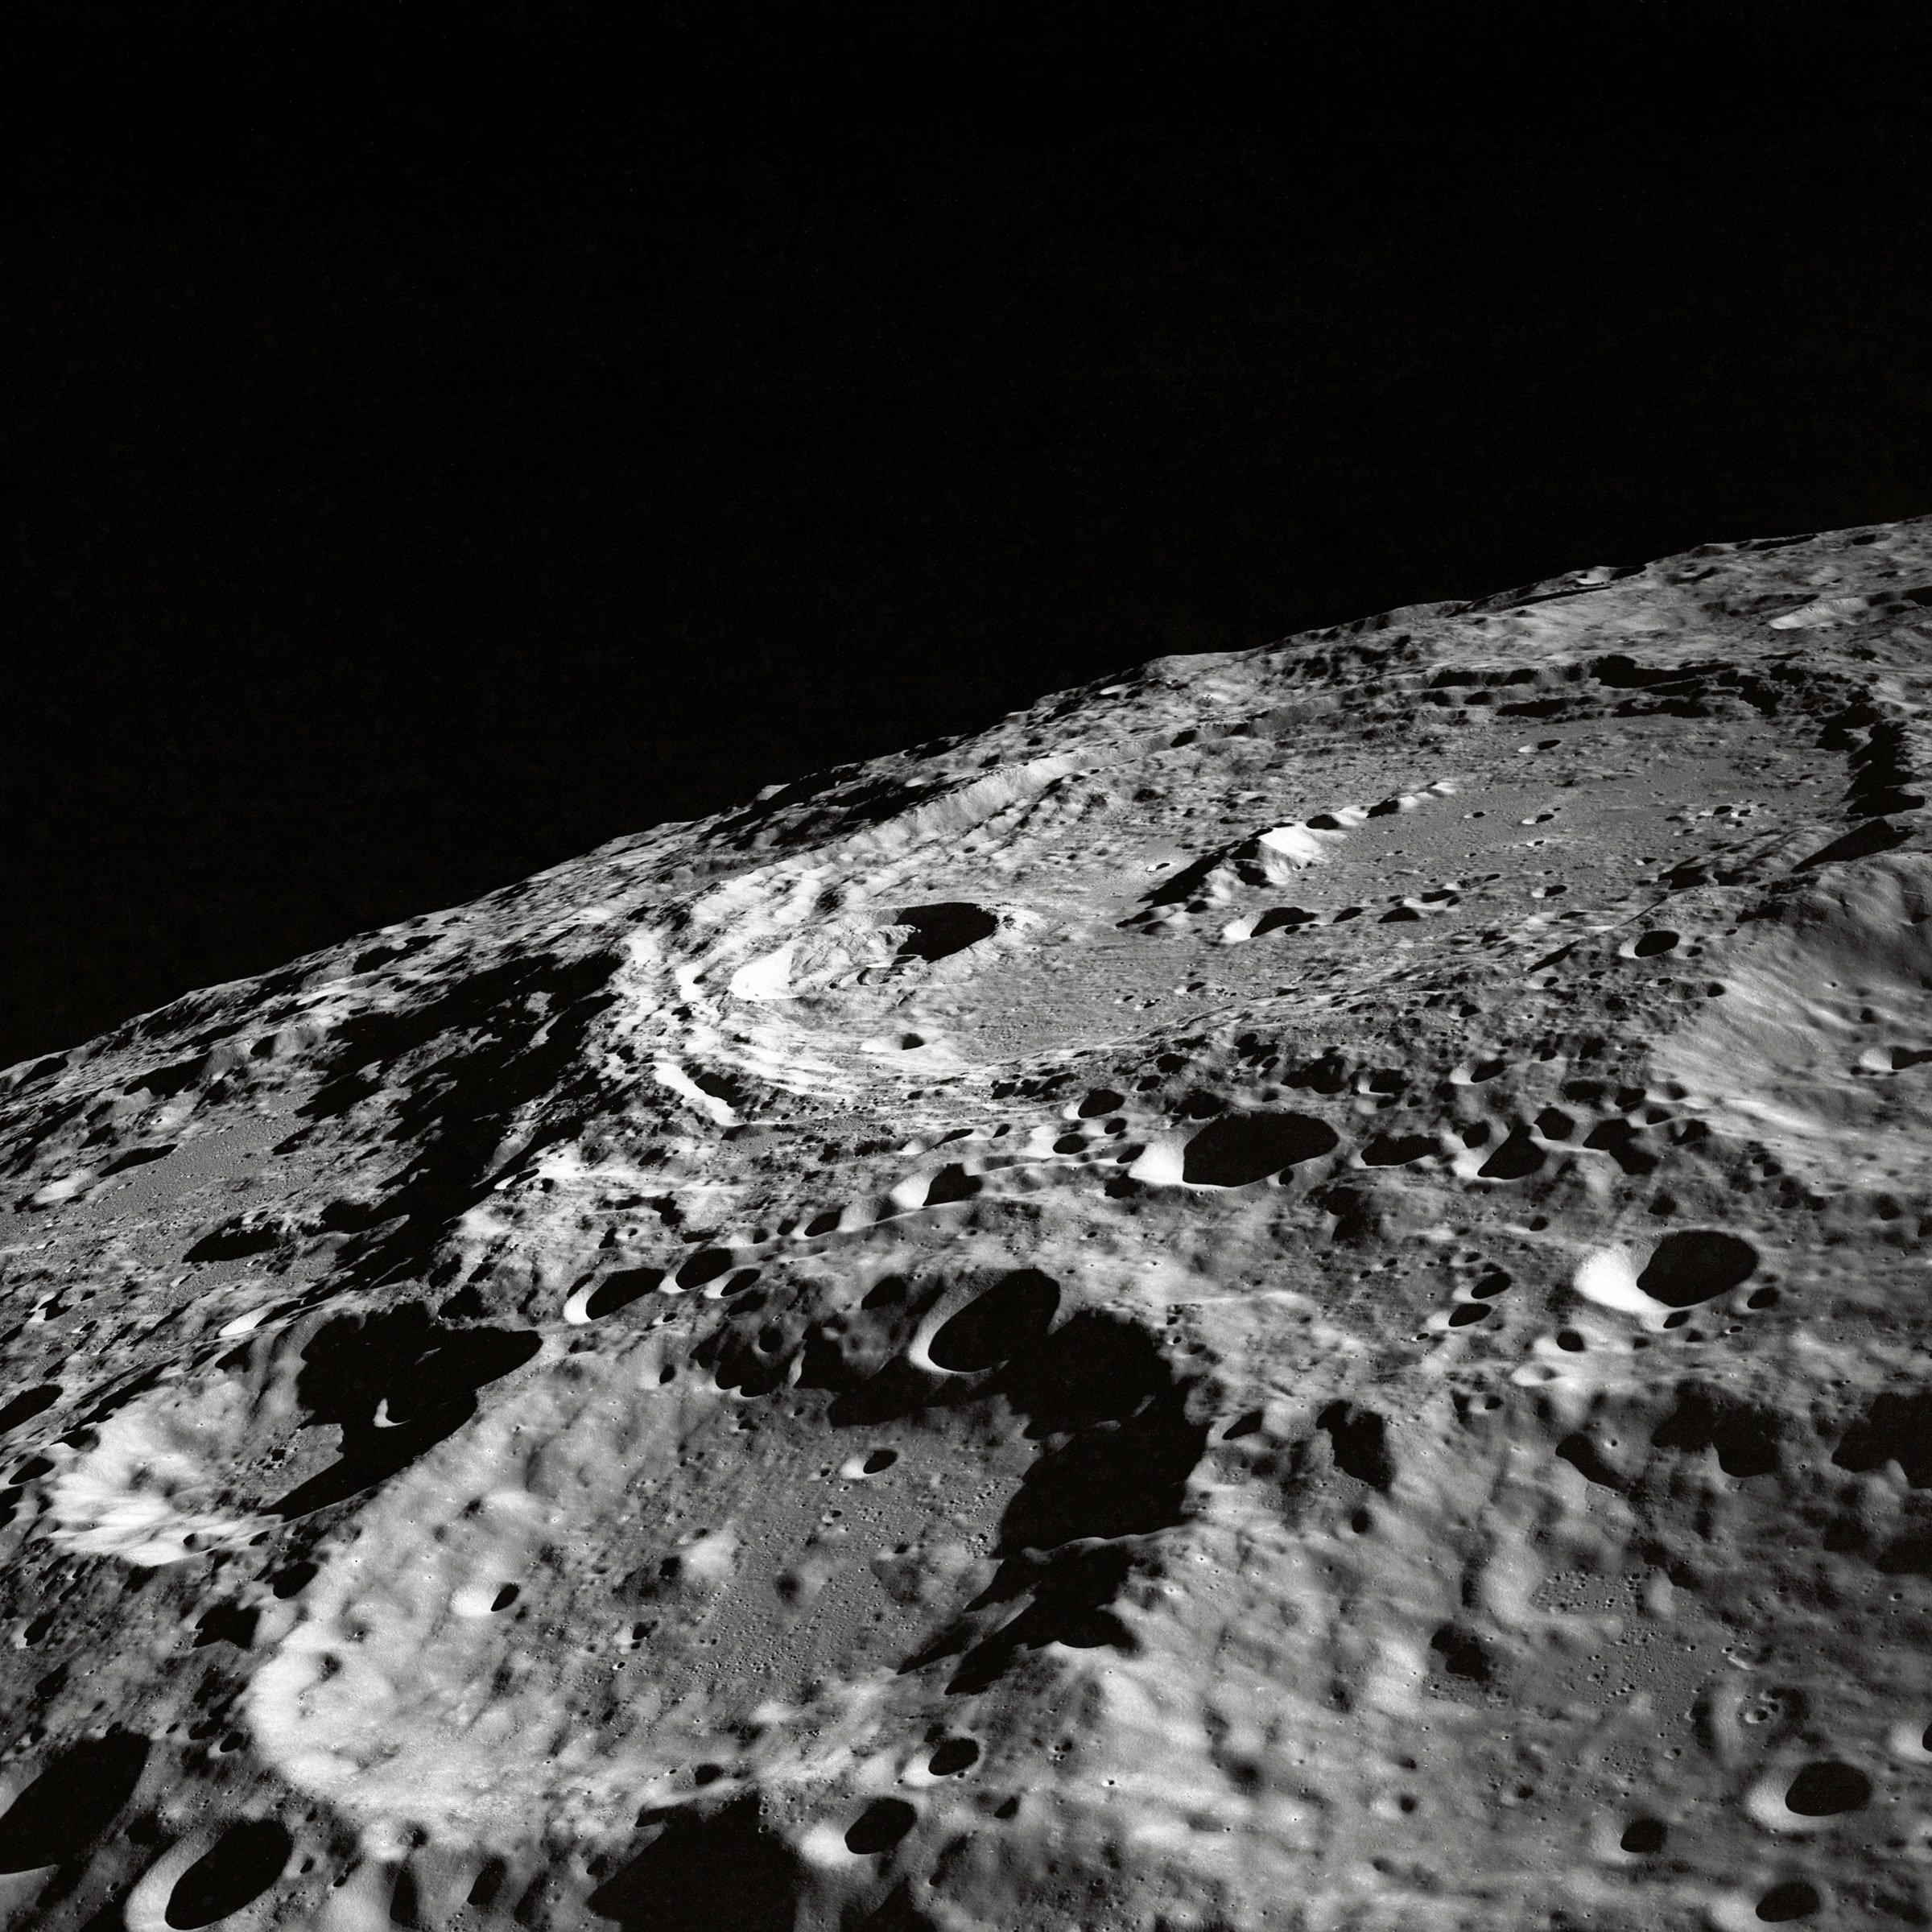  Property Rights on the Moon   Space Invaders    Read on  